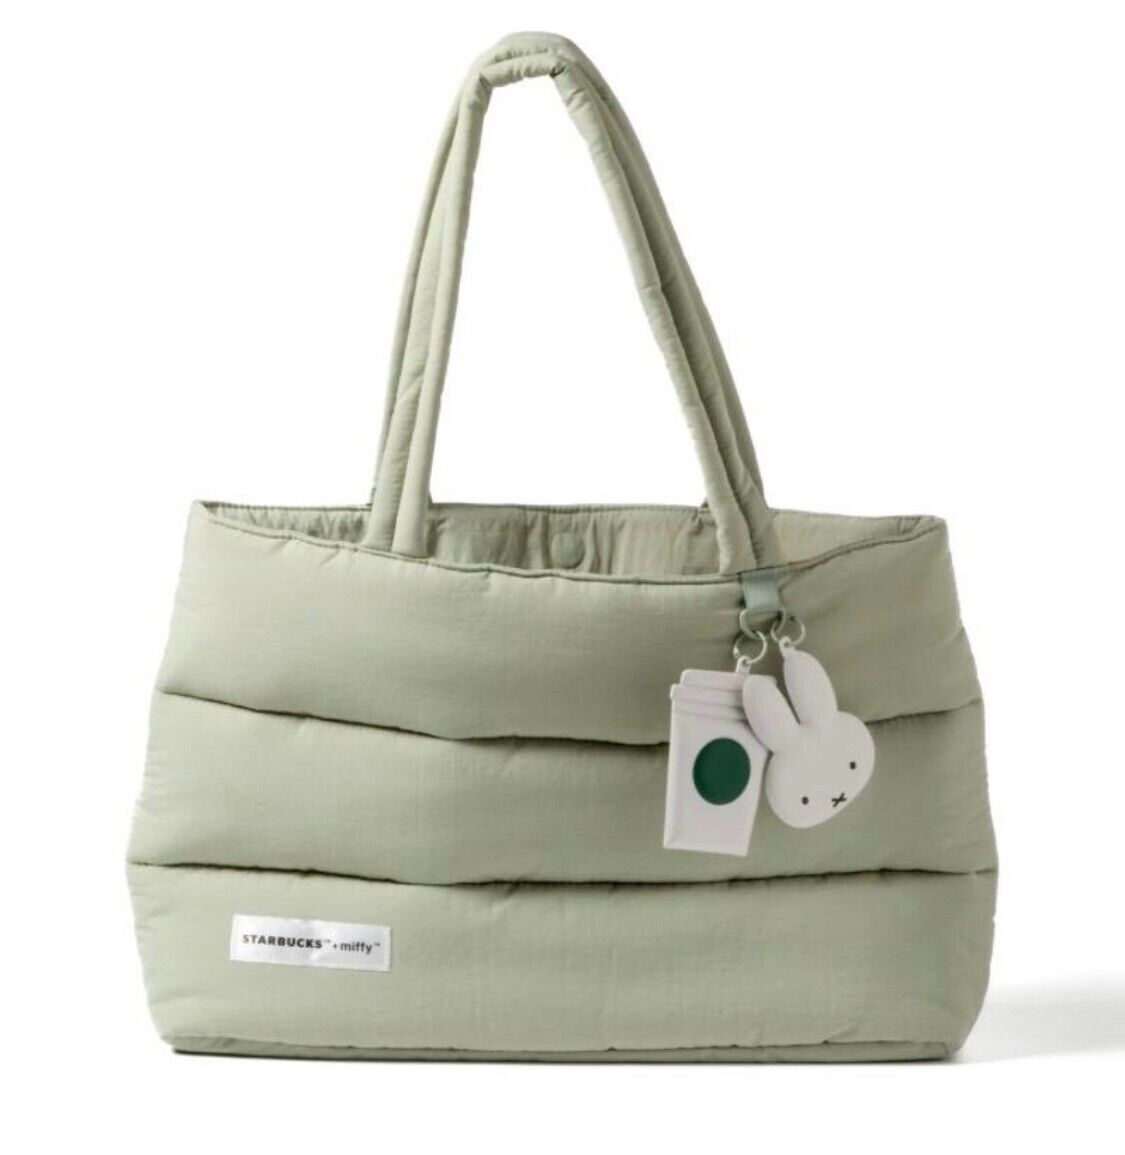 Starbucks x Miffy collaboration tote bag Green Singapore limited from Japan